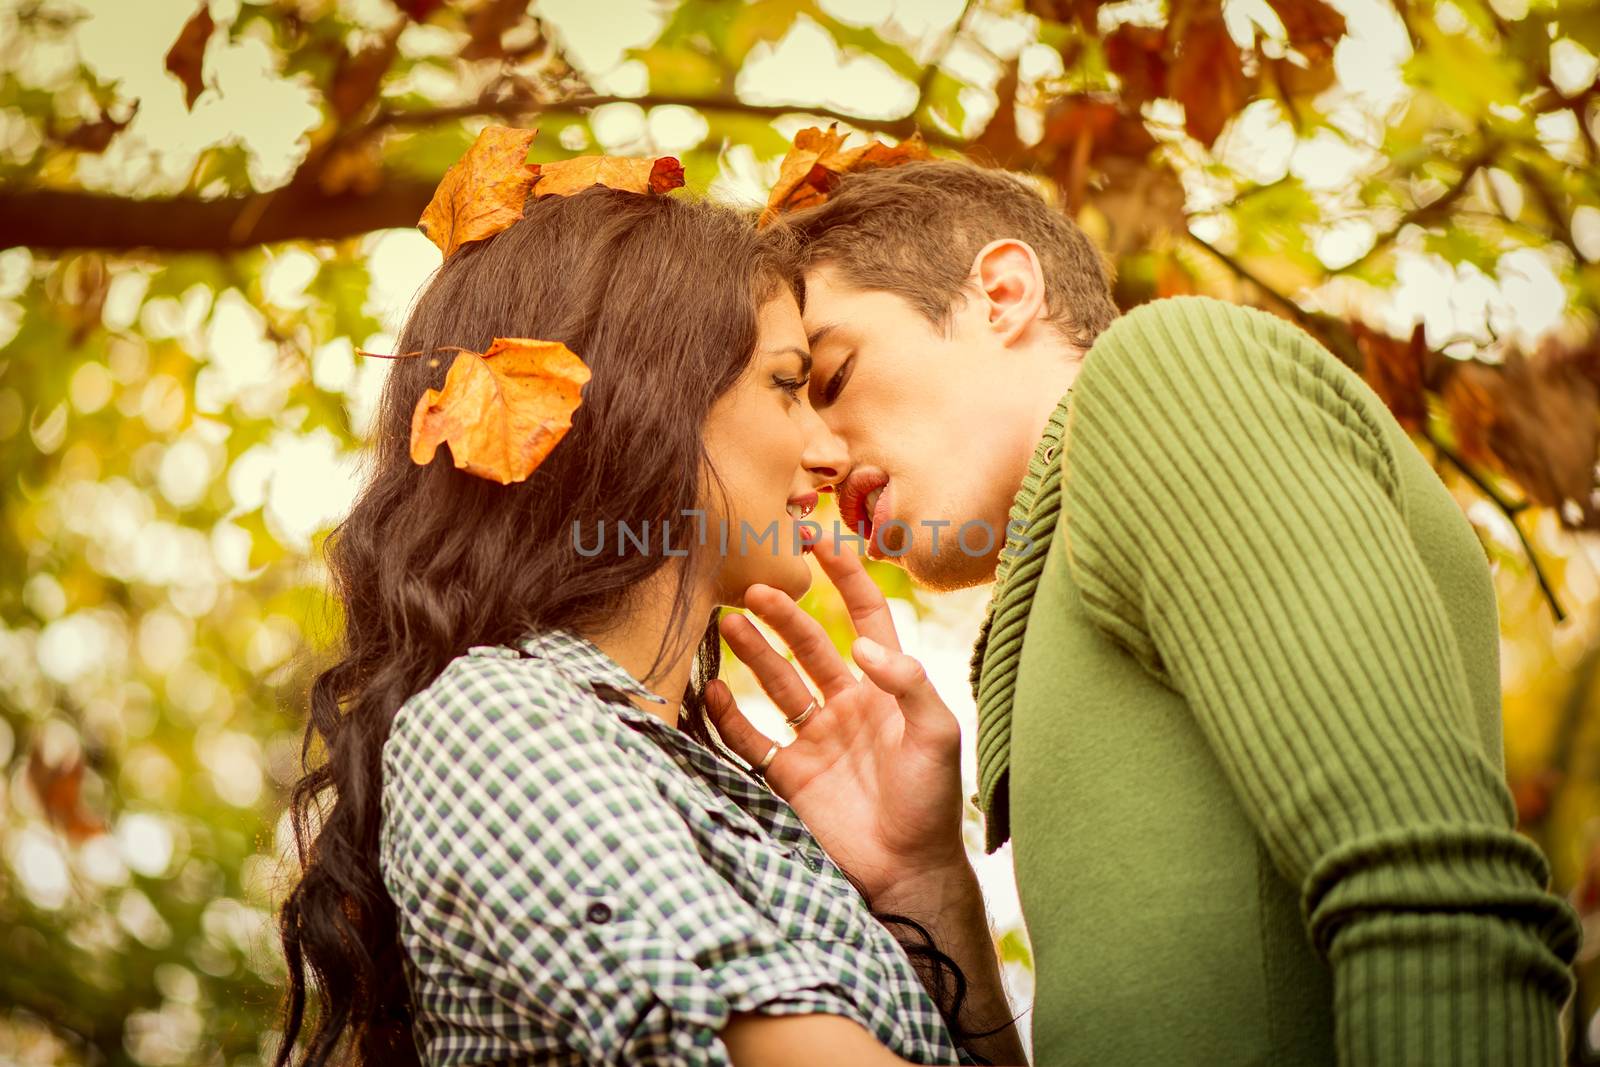 Close-up kiss of a young heterosexual couple in love in the natural environment, while the sun shines through the trees.